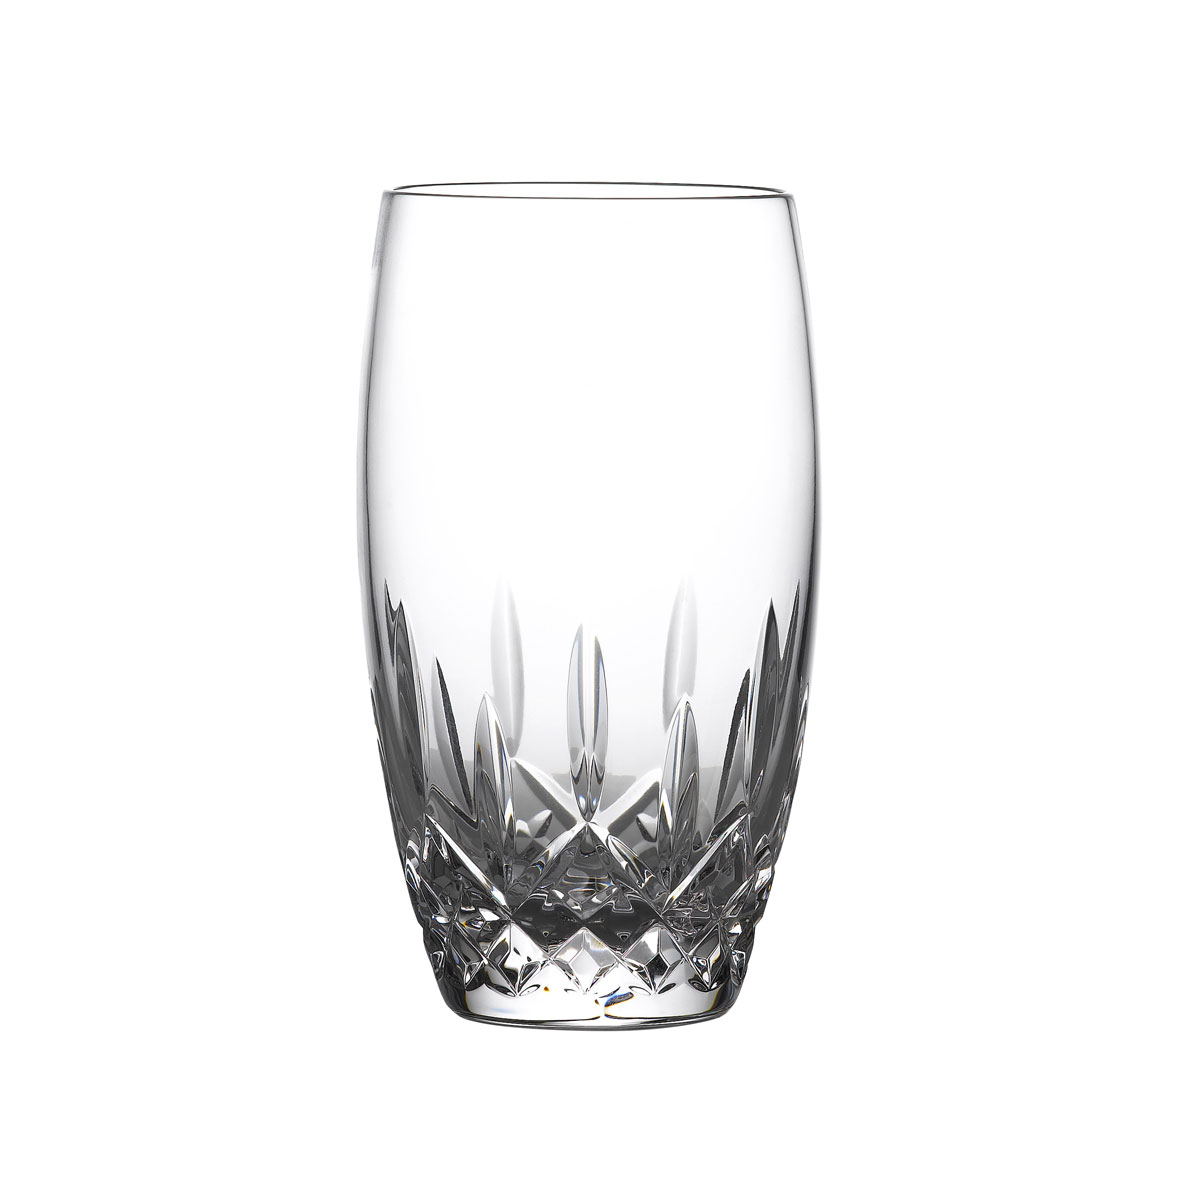 Waterford Crystal Lismore Nouveau Drinking Glass, Single